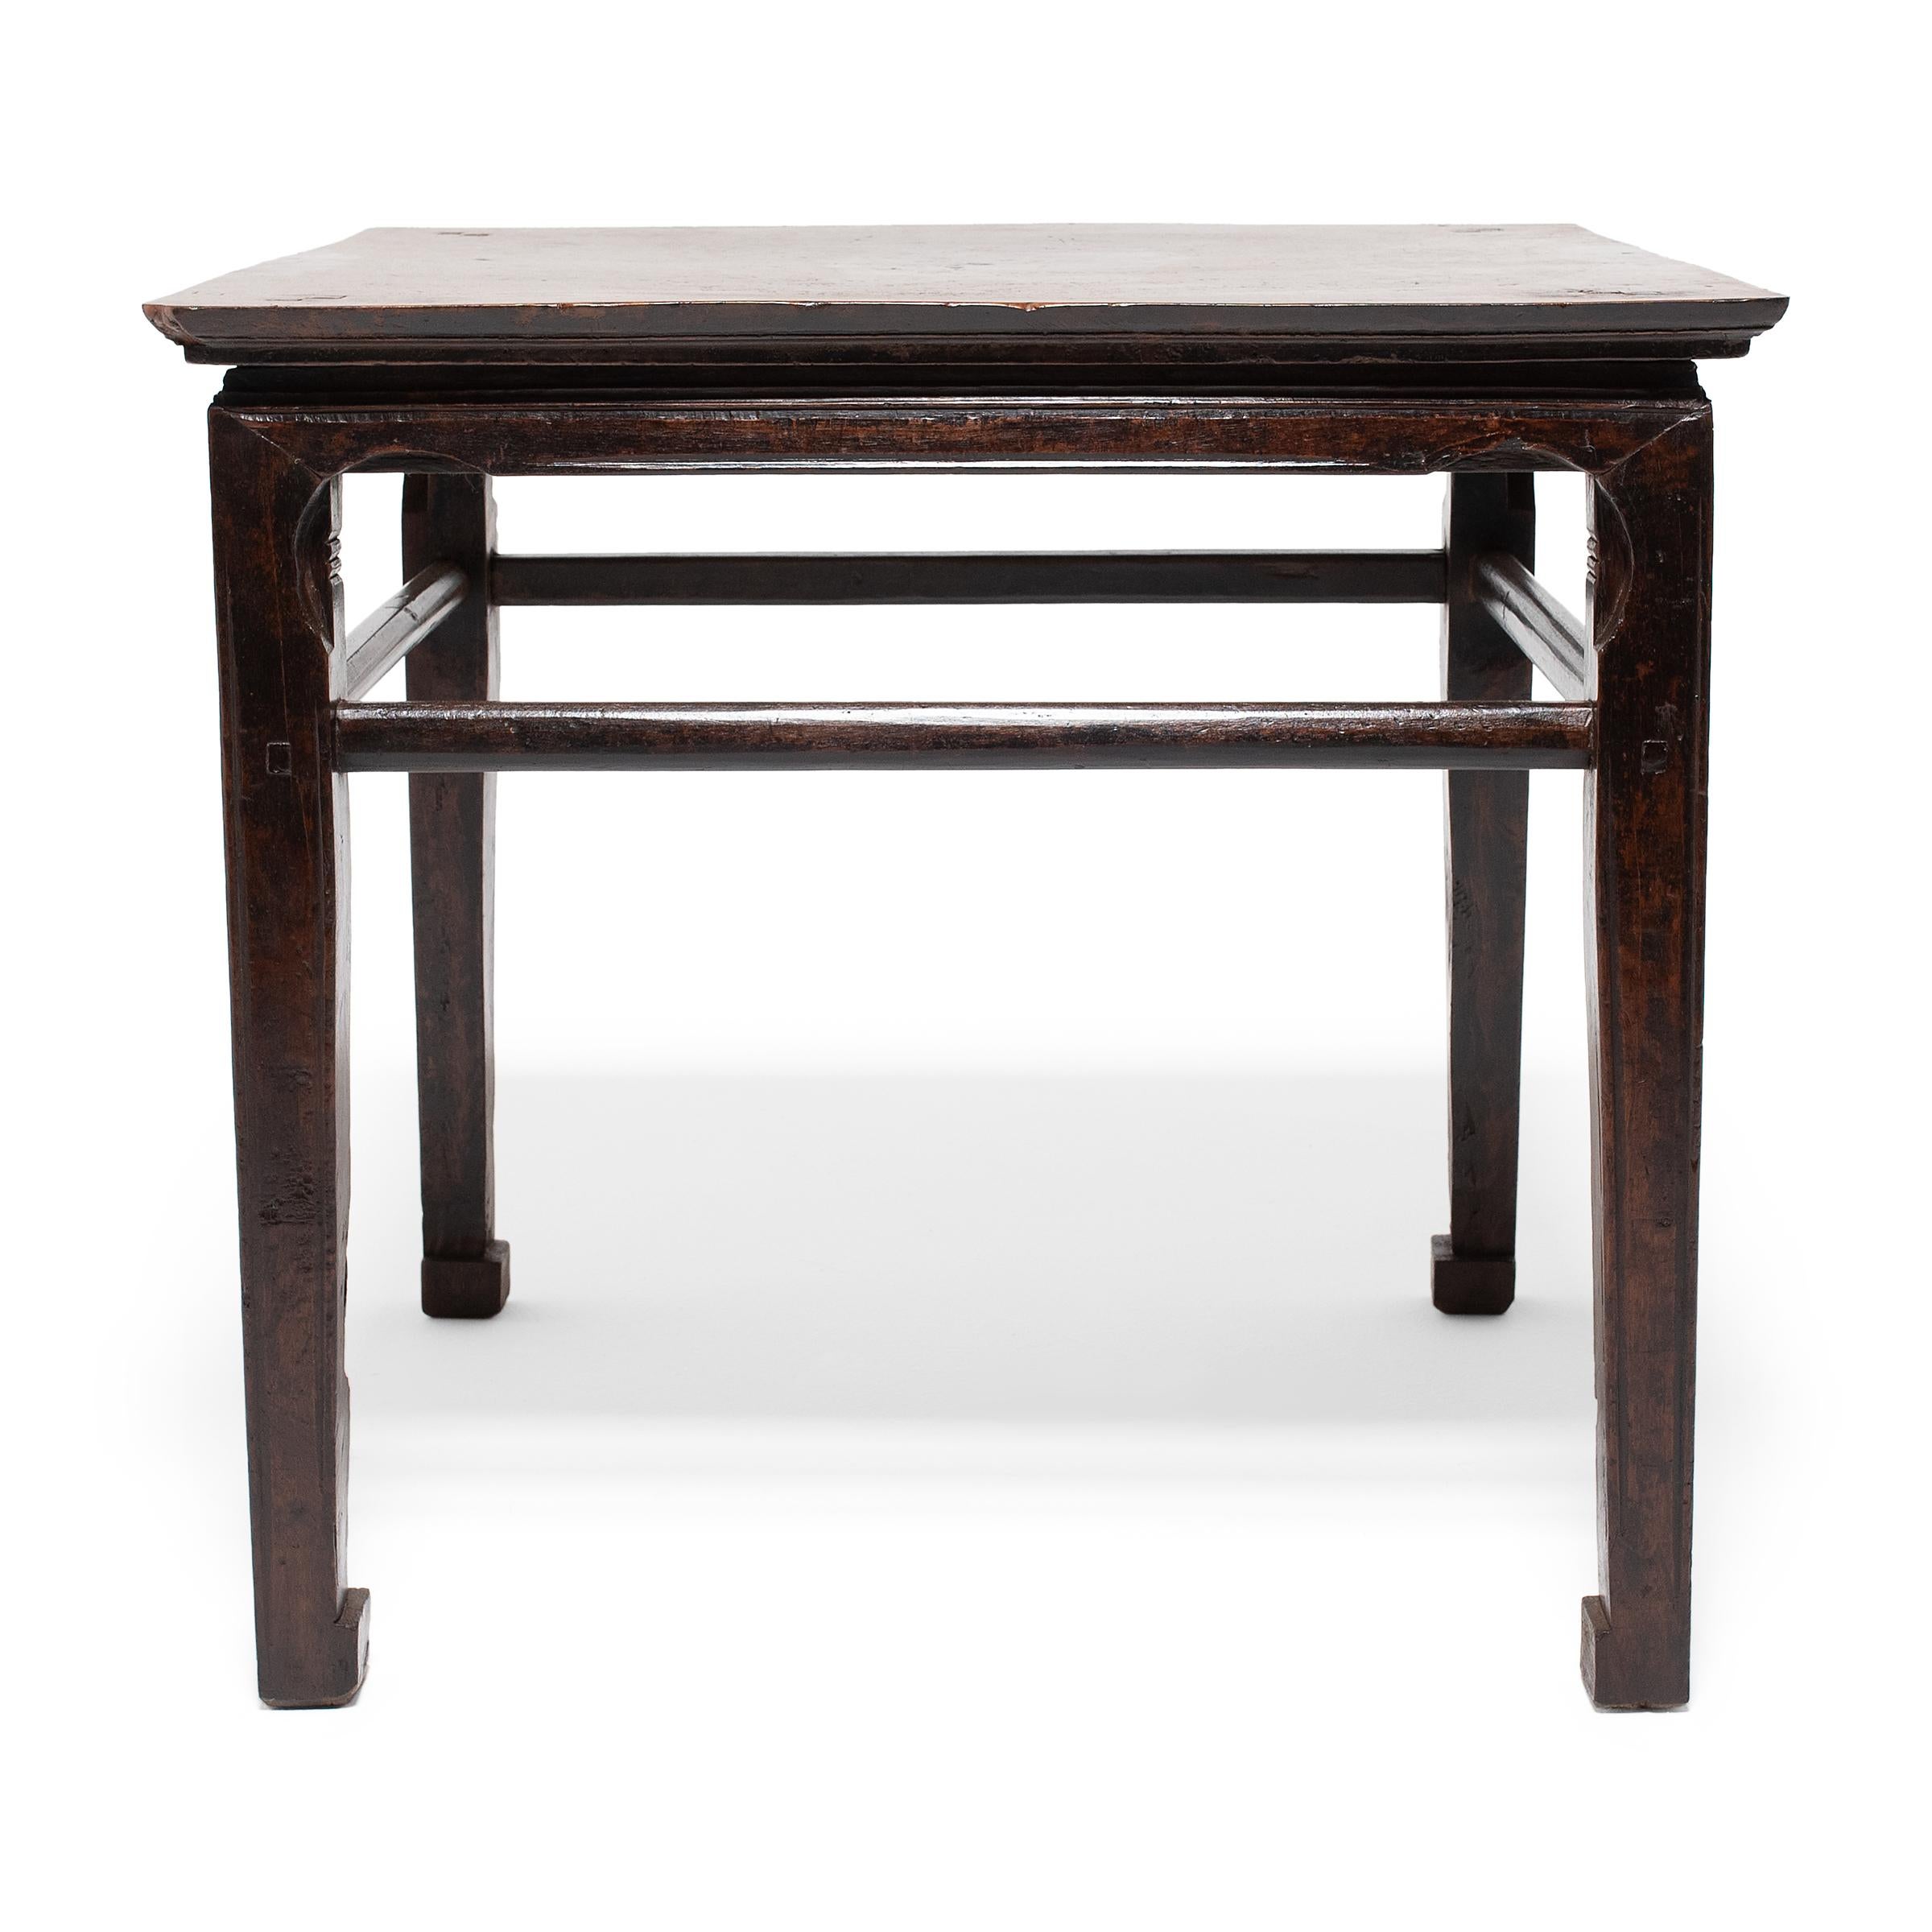 Qing Chinese Square Burlwood Table, c. 1850 For Sale